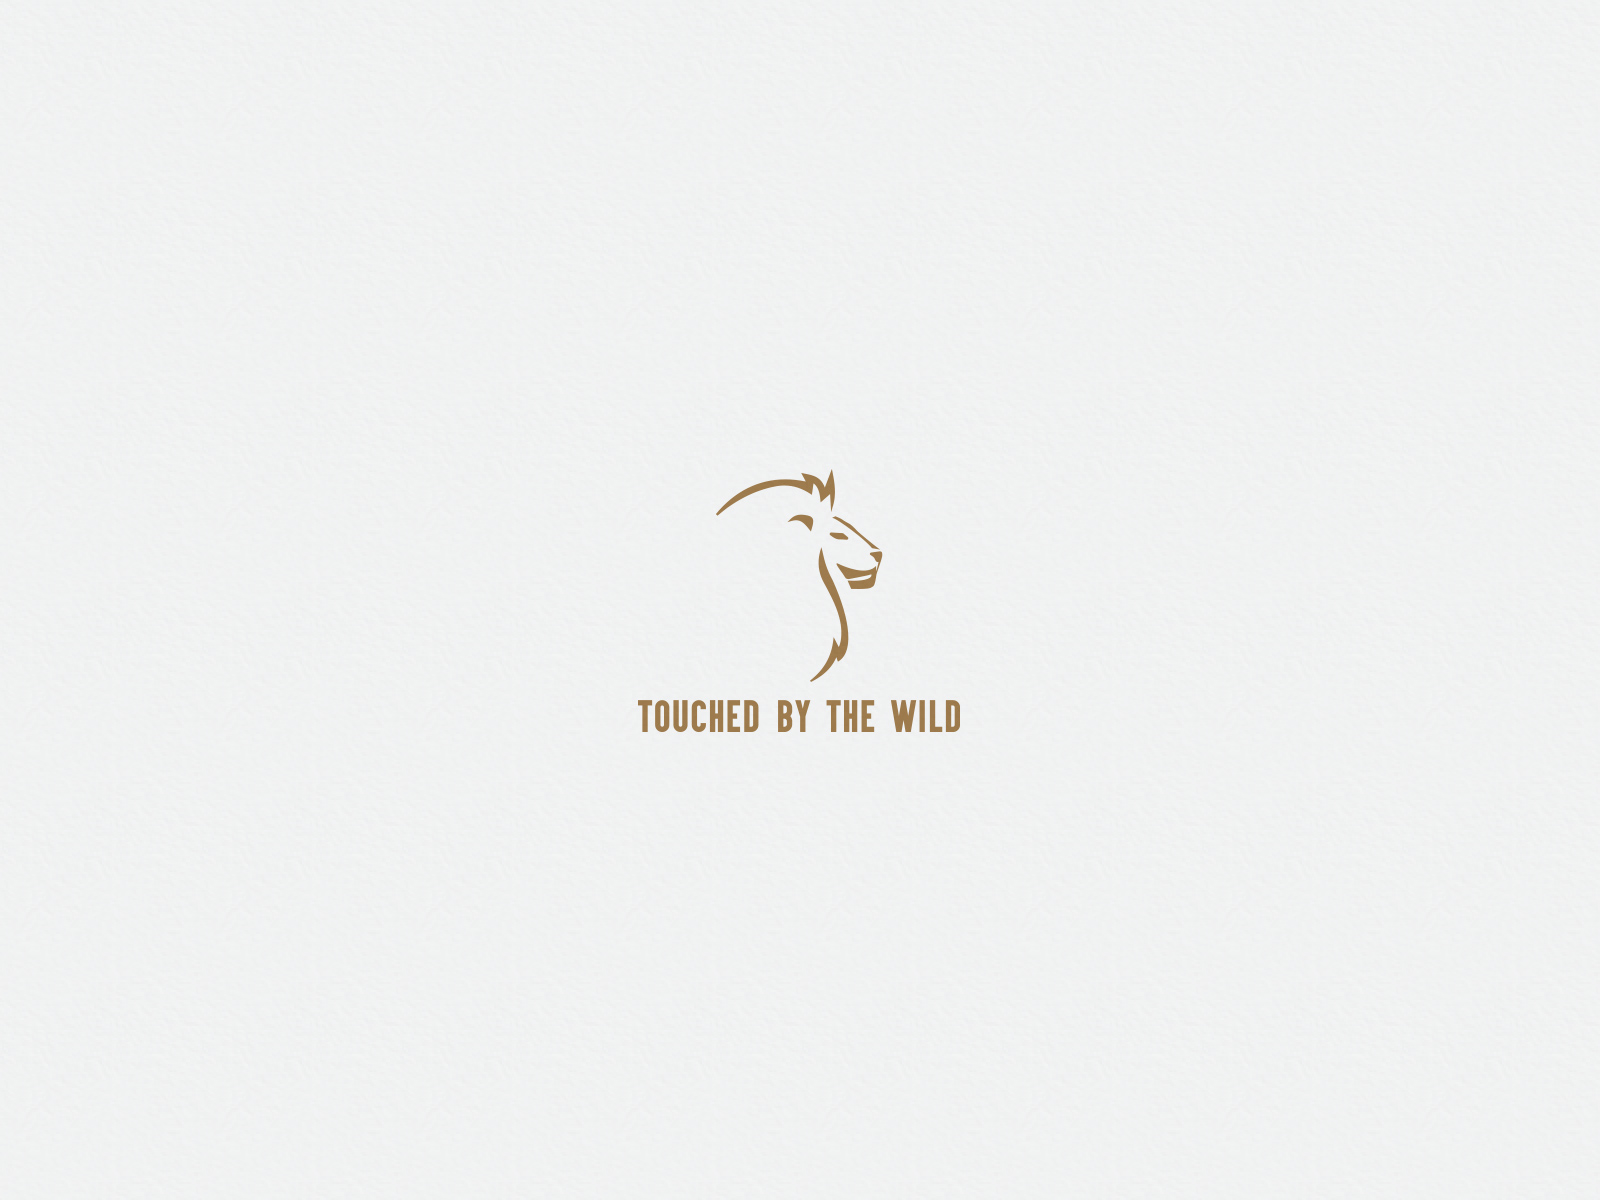 Touched By The Wild - Logo on paper texture background